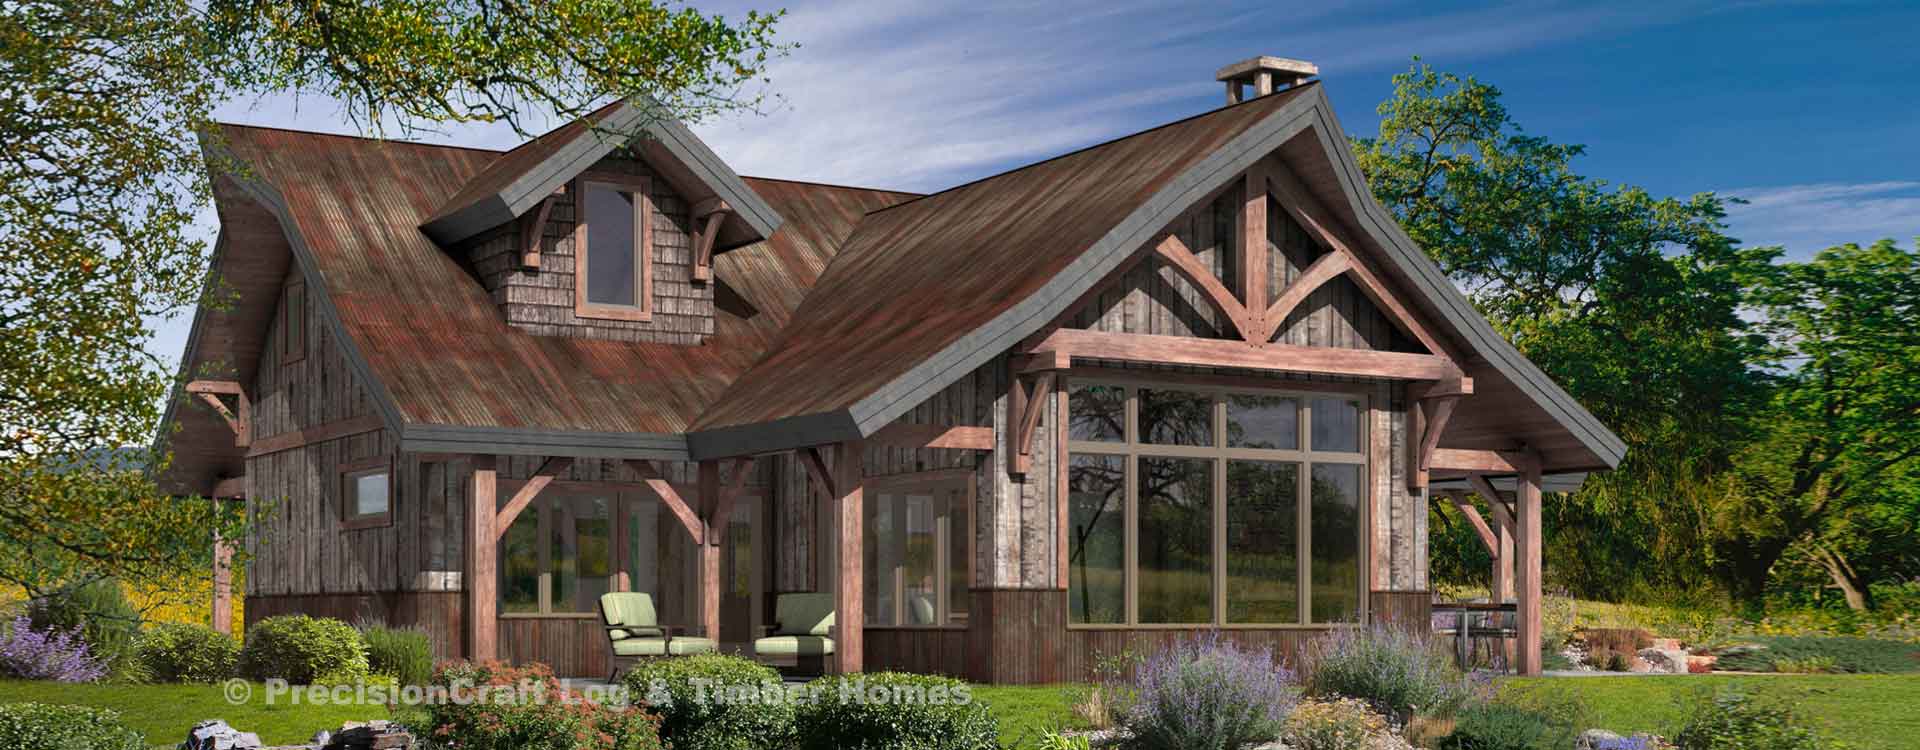 Ashcroft timber home Rendering